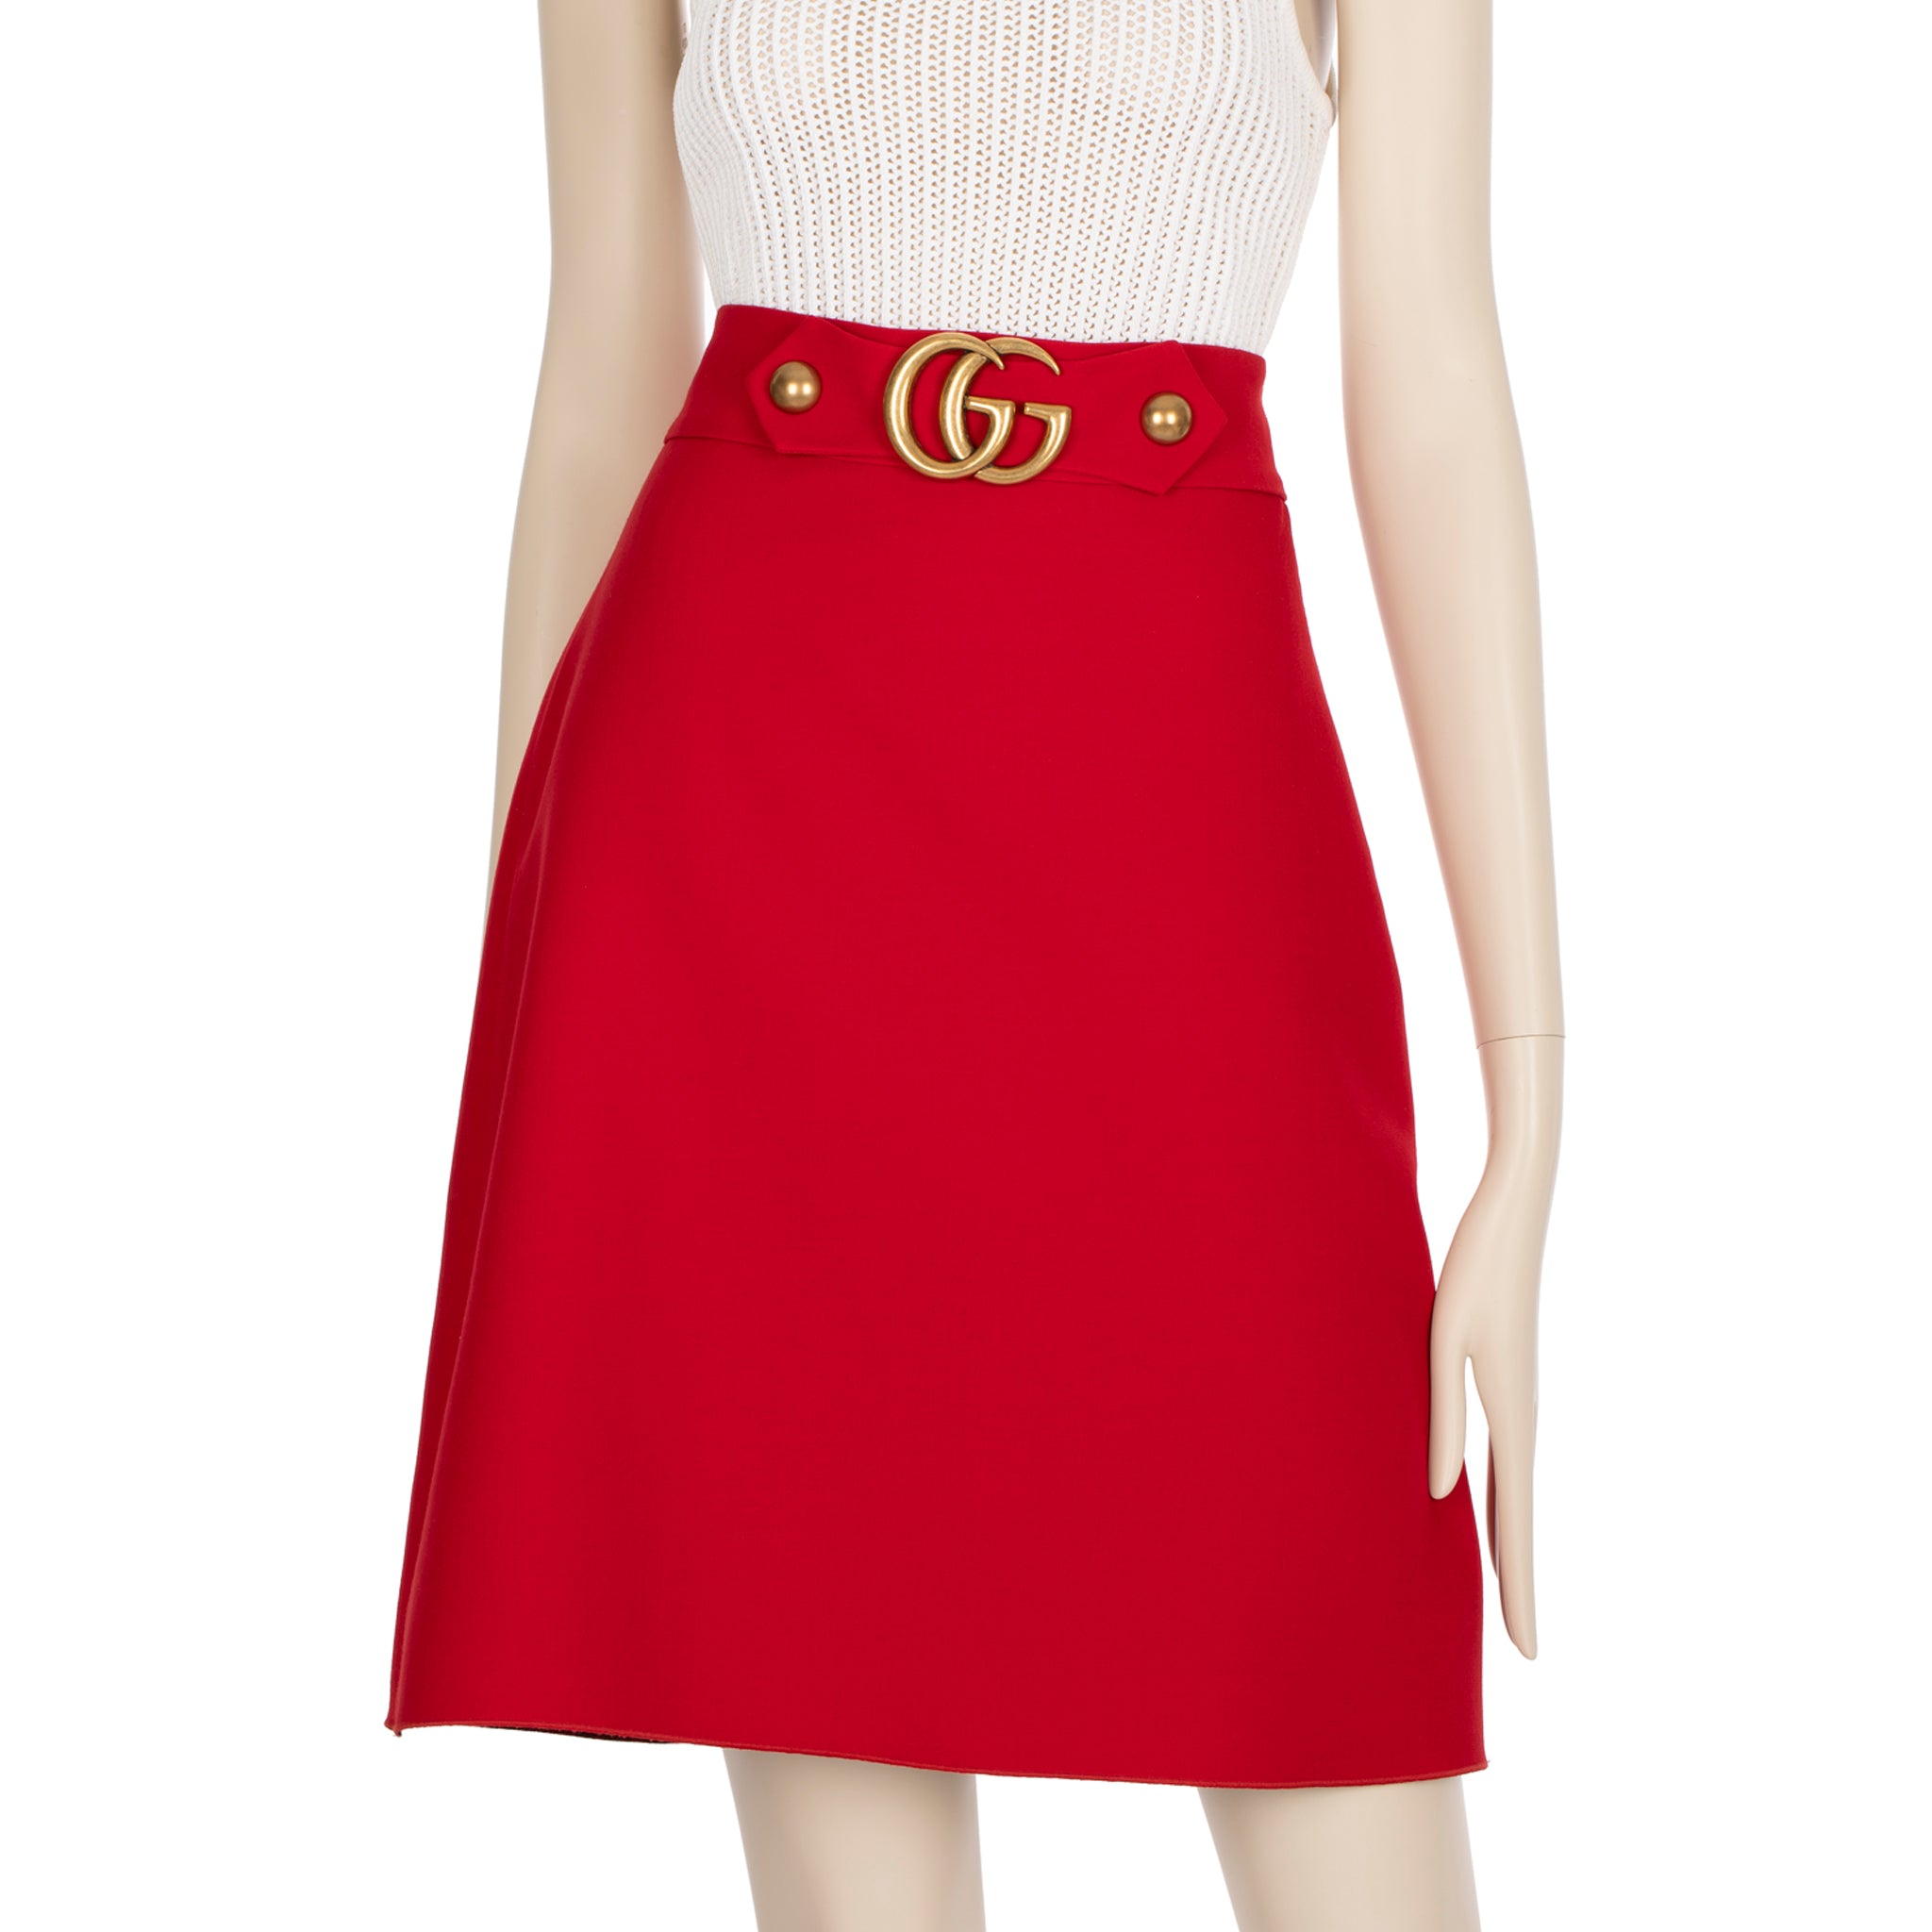 Gucci Marmont Crepe Wool Silk Skirt With Gold Buckle 42 IT